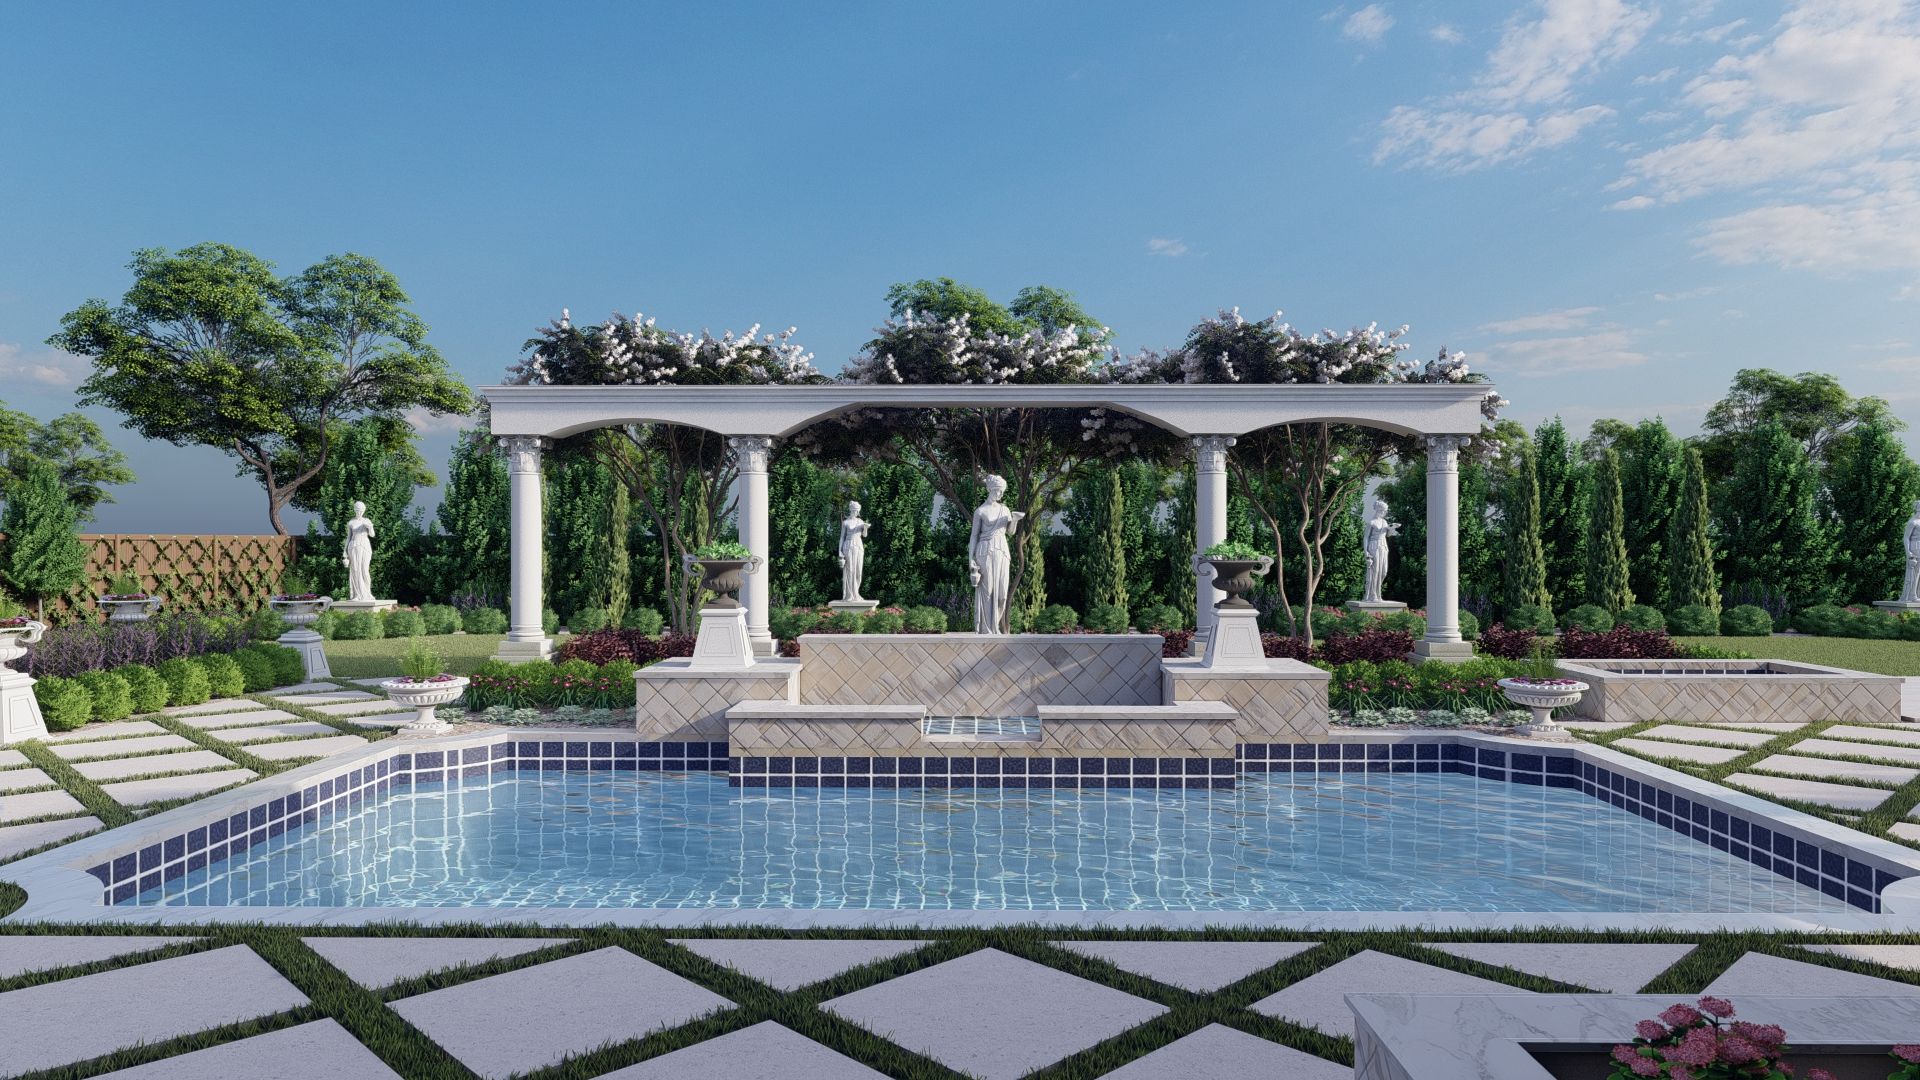 formal garden design, statues as art around a pool in the spring  